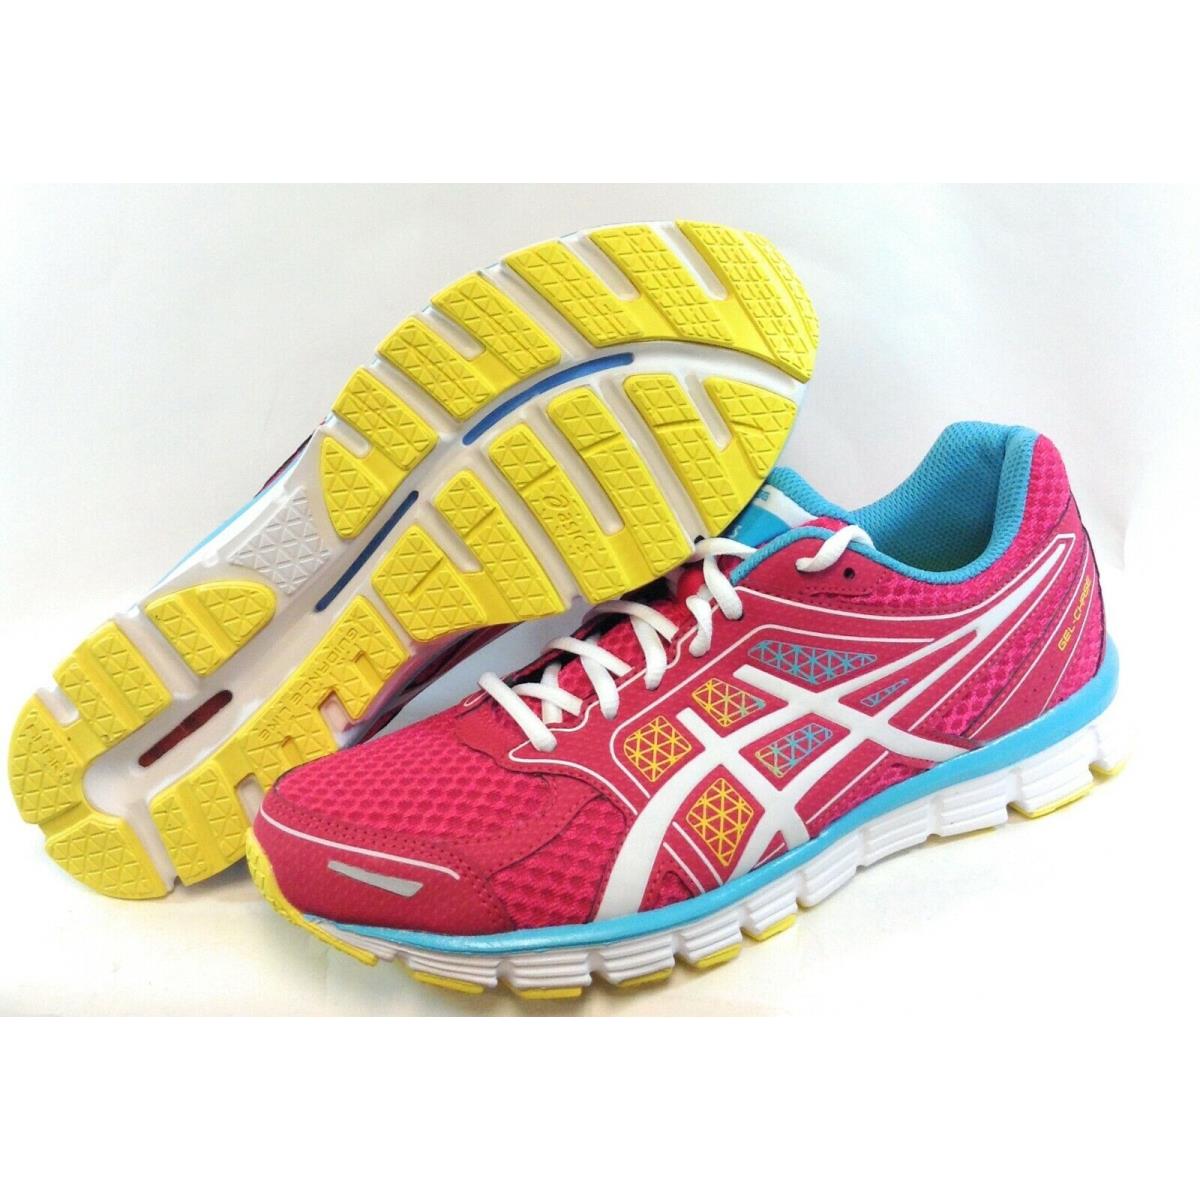 Womens Asics Gel Chase T3A7Q 2101 Teaberry Pink White Aqua Sneakers Shoes